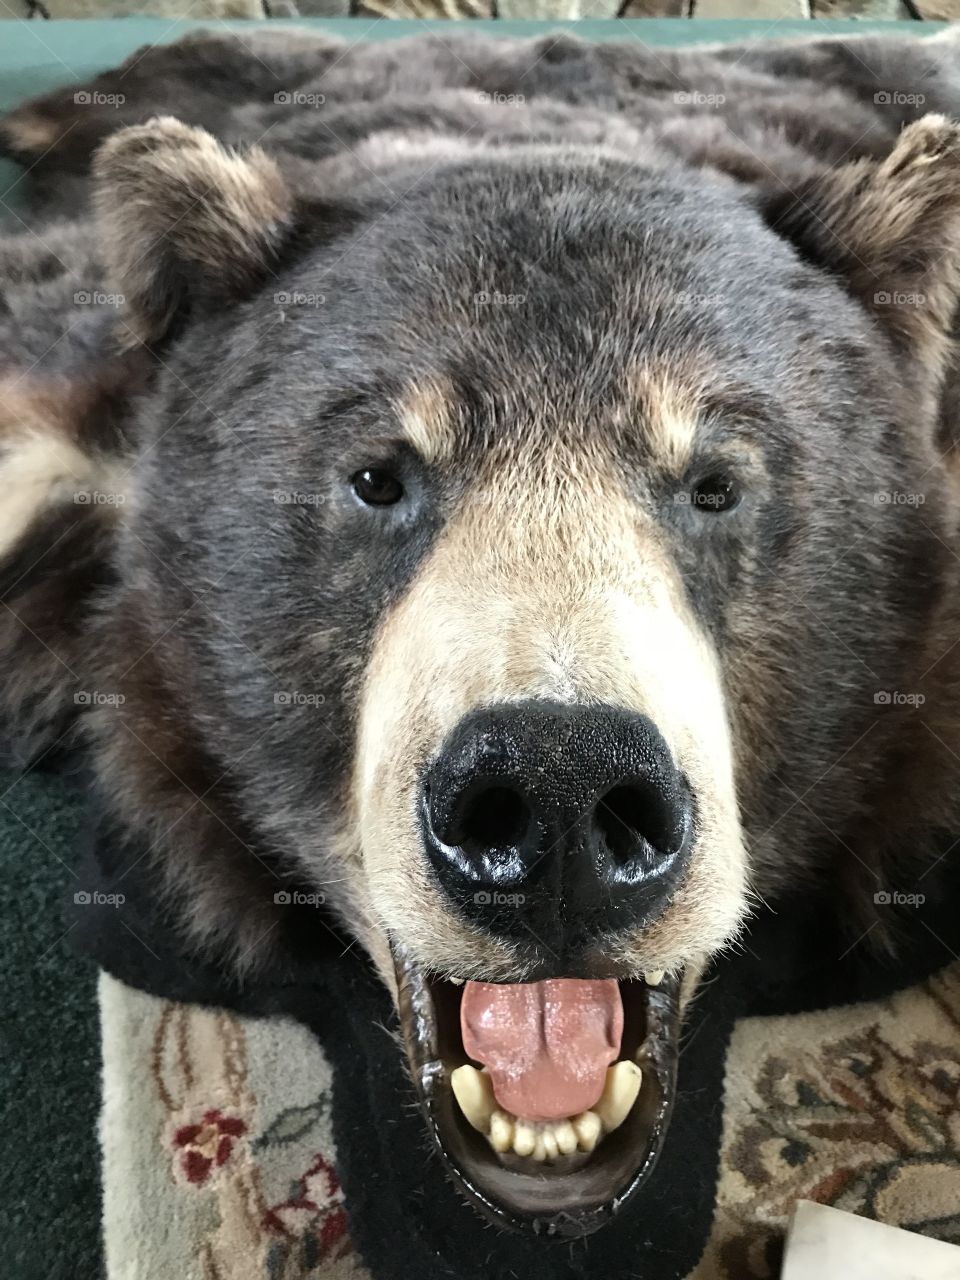 Bear in Montana outback 